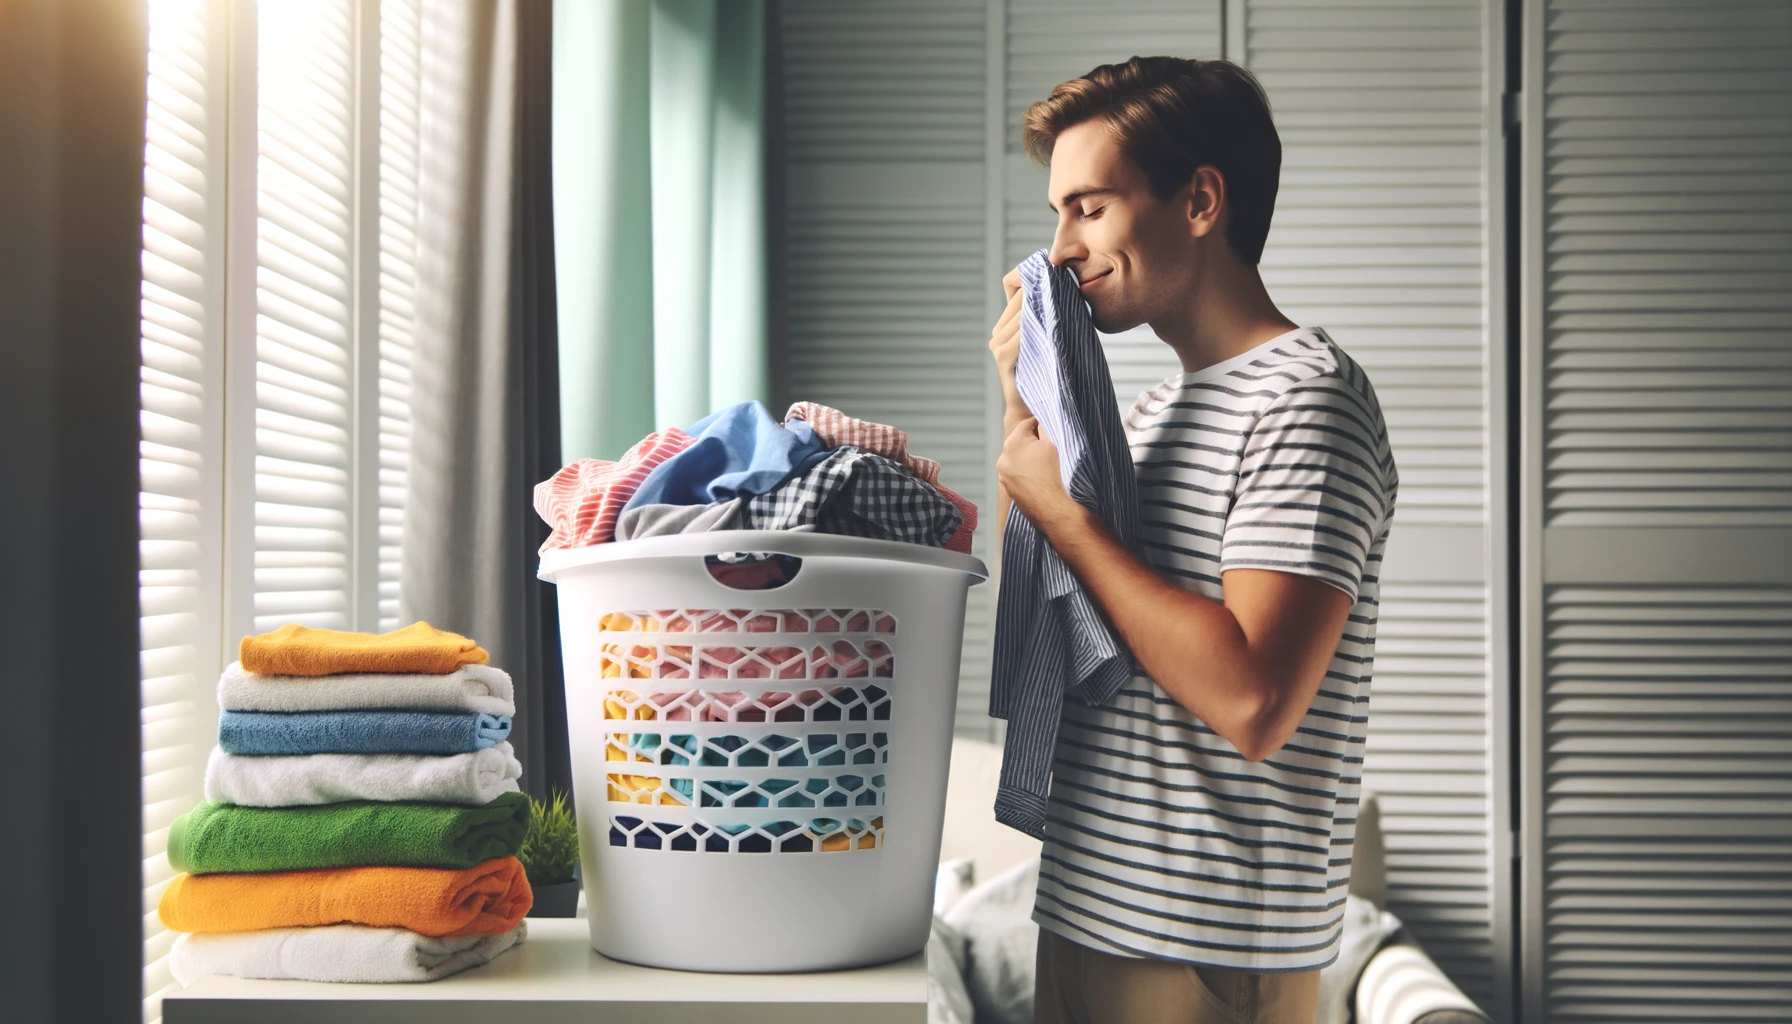 A person standing by a window, holding clothes close to their face, with a laundry basket full of colorful clothes nearby.